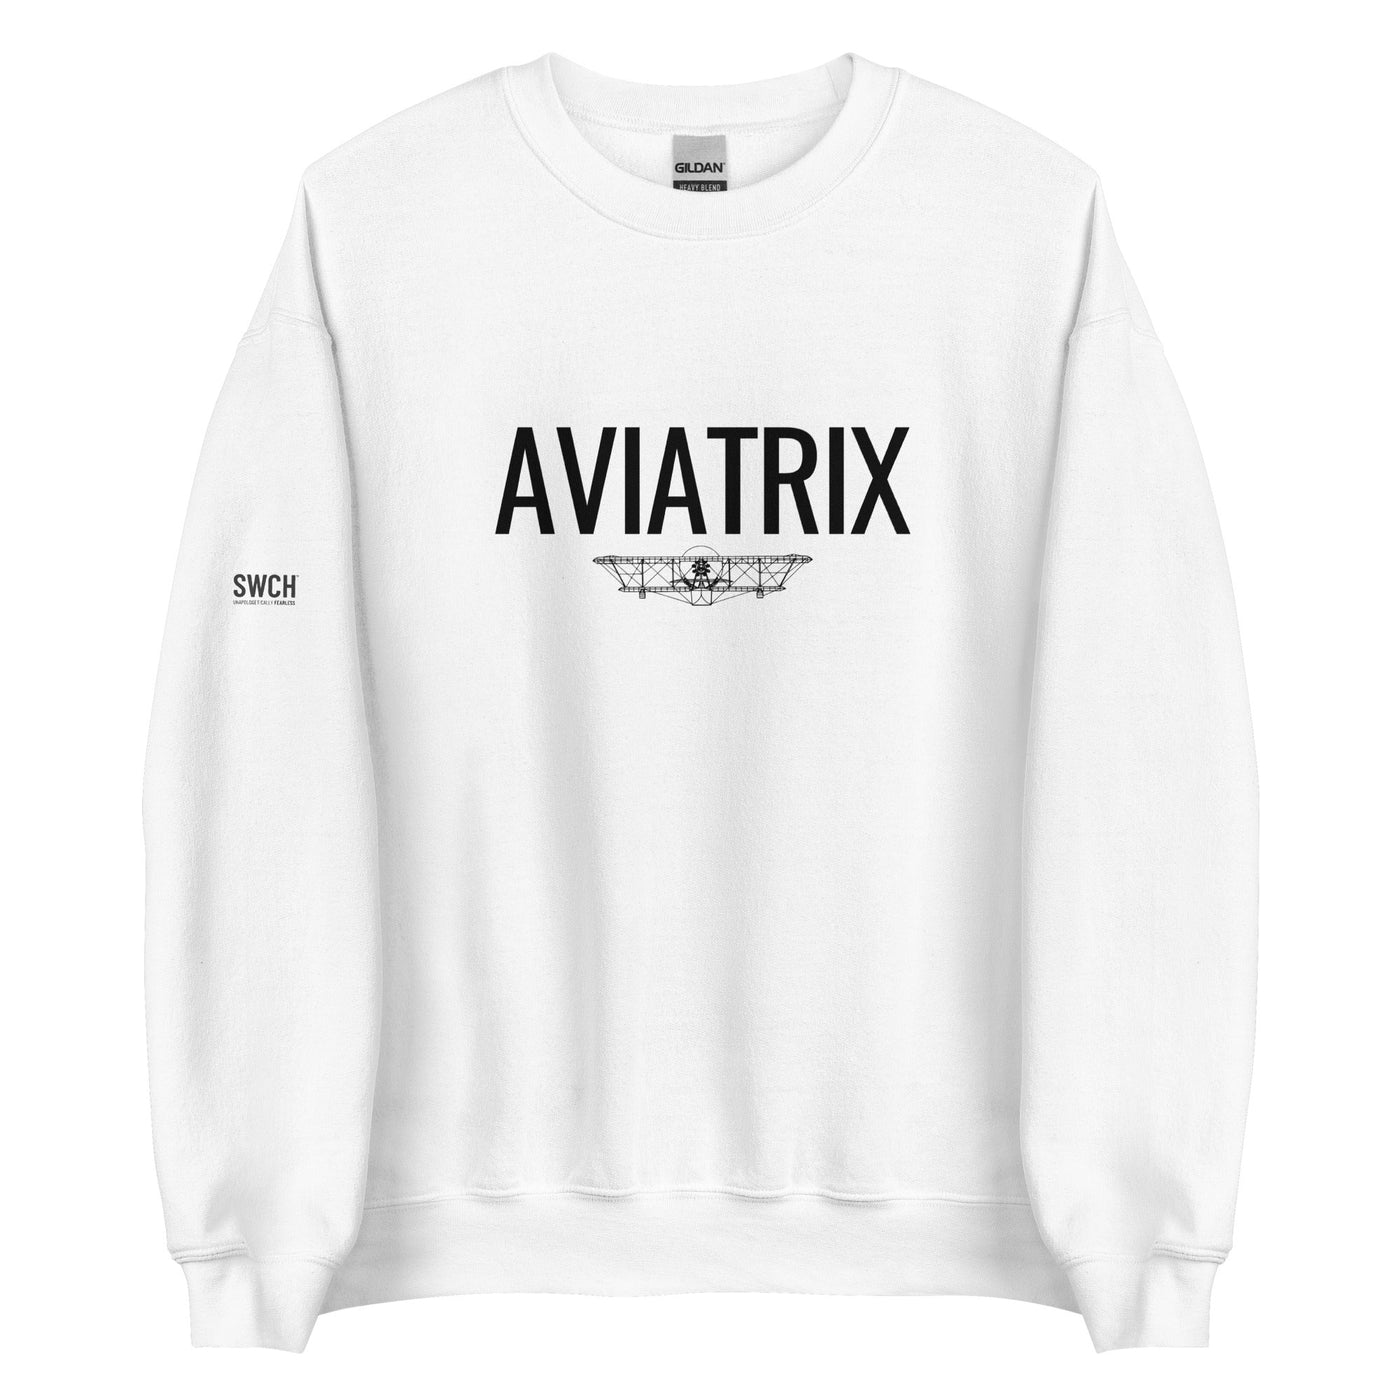 Get trendy with Unisex Aviatrix Sweatshirt -  available at SWCH Store. Grab yours for £45 today!